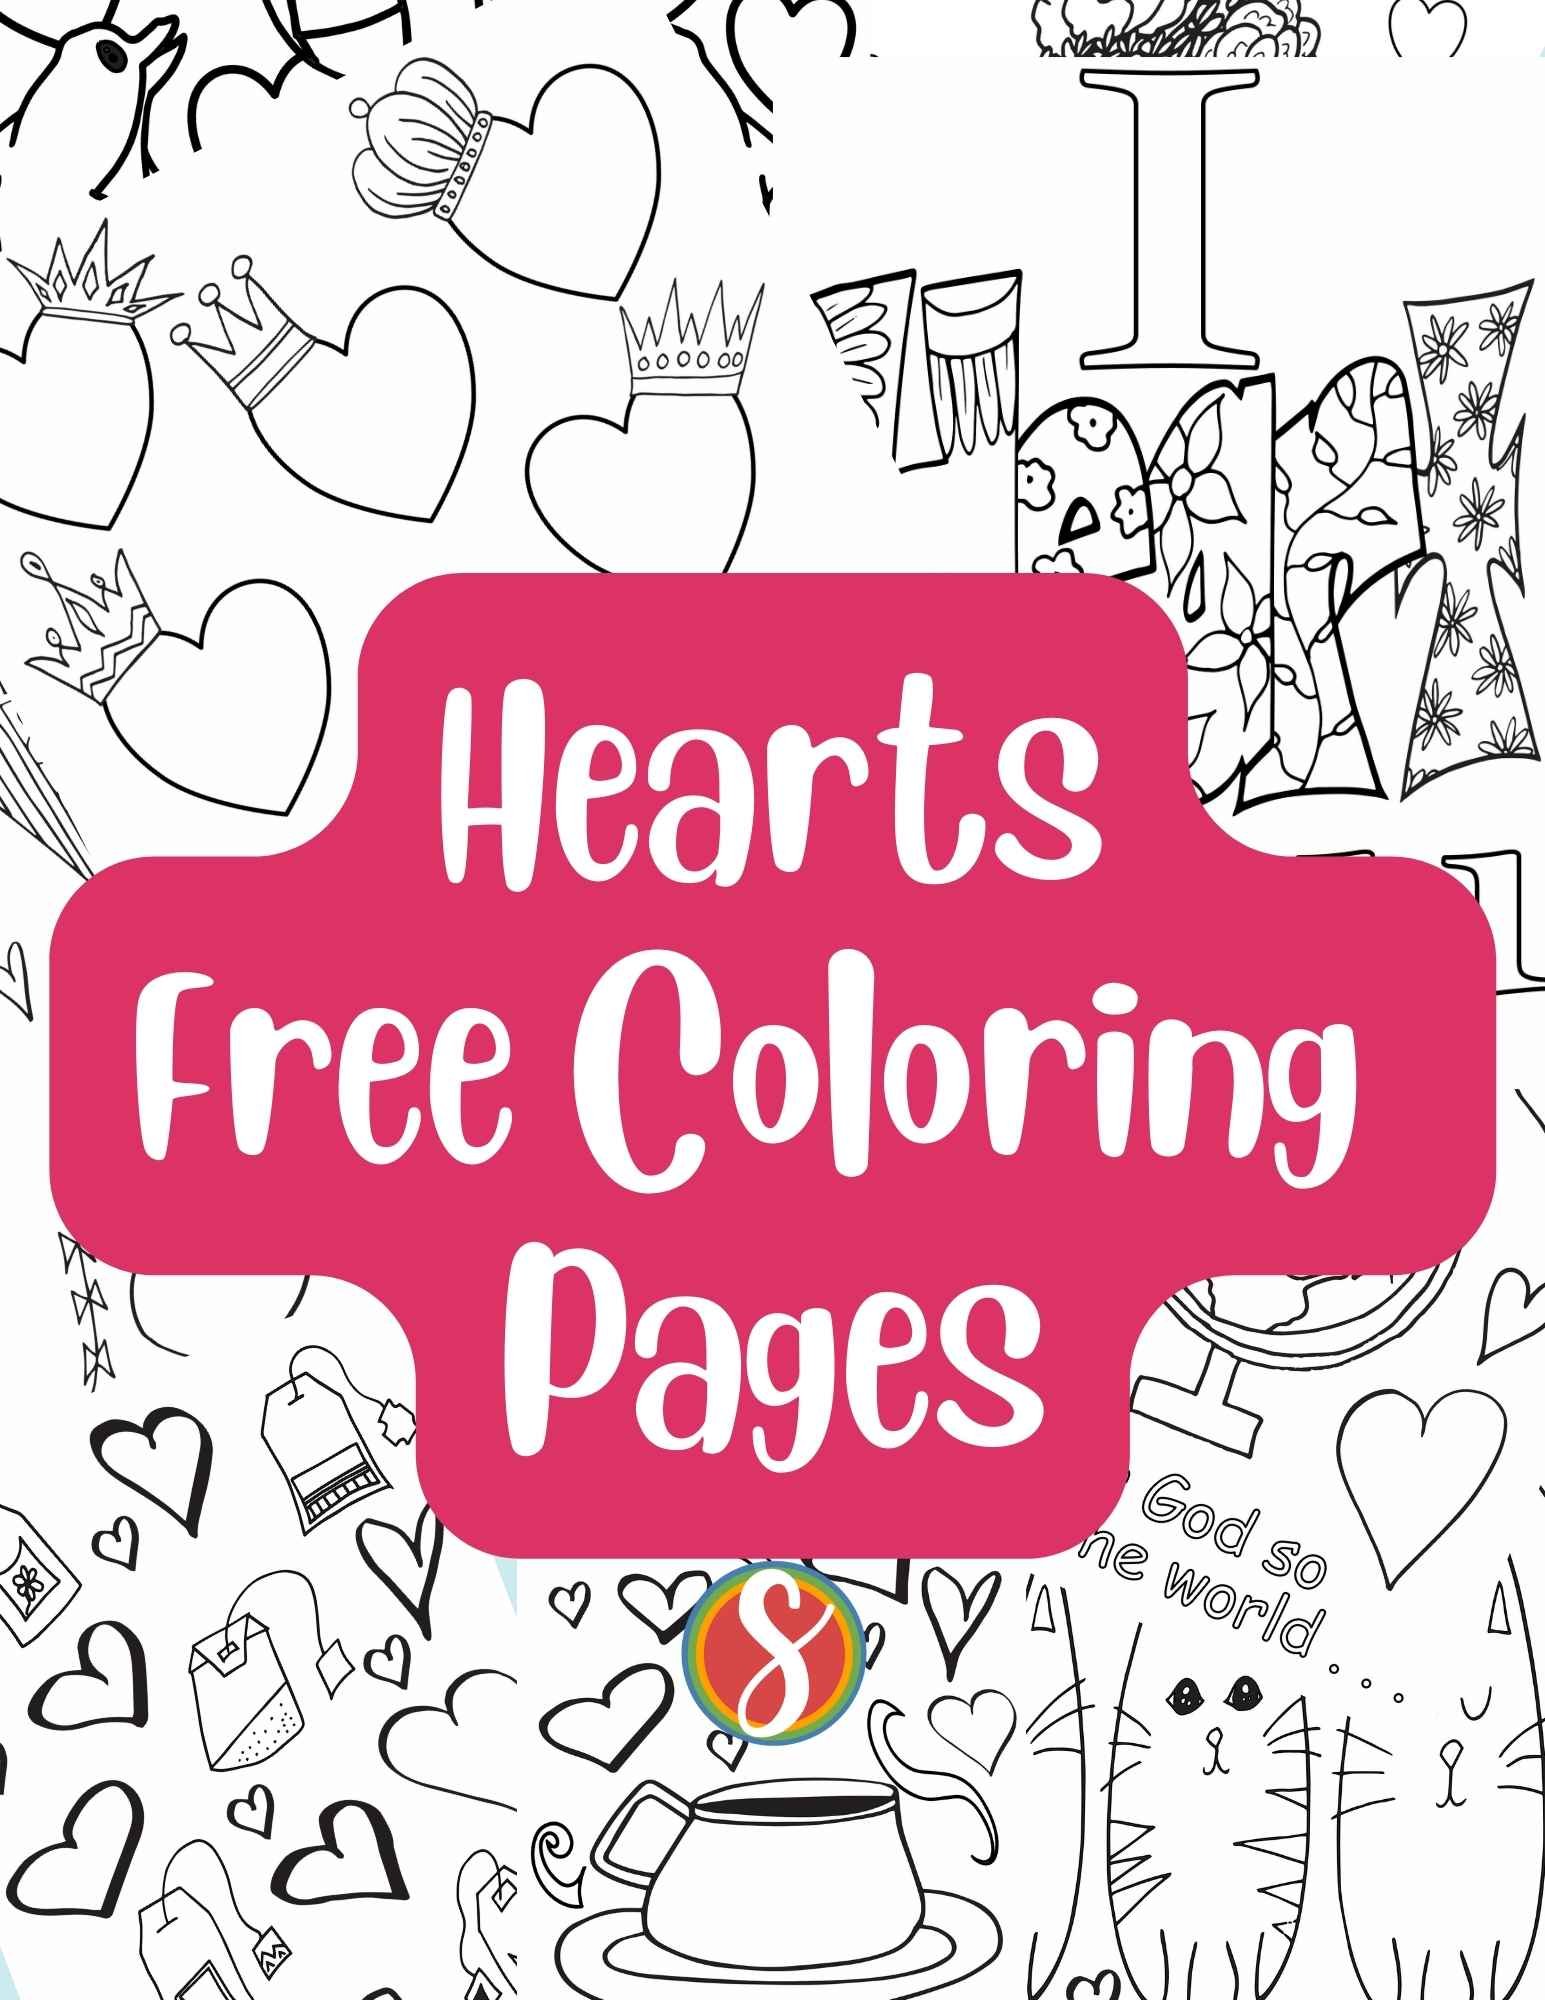 a collage of heart coloring pages with white text on pink background "hearts coloring pages"